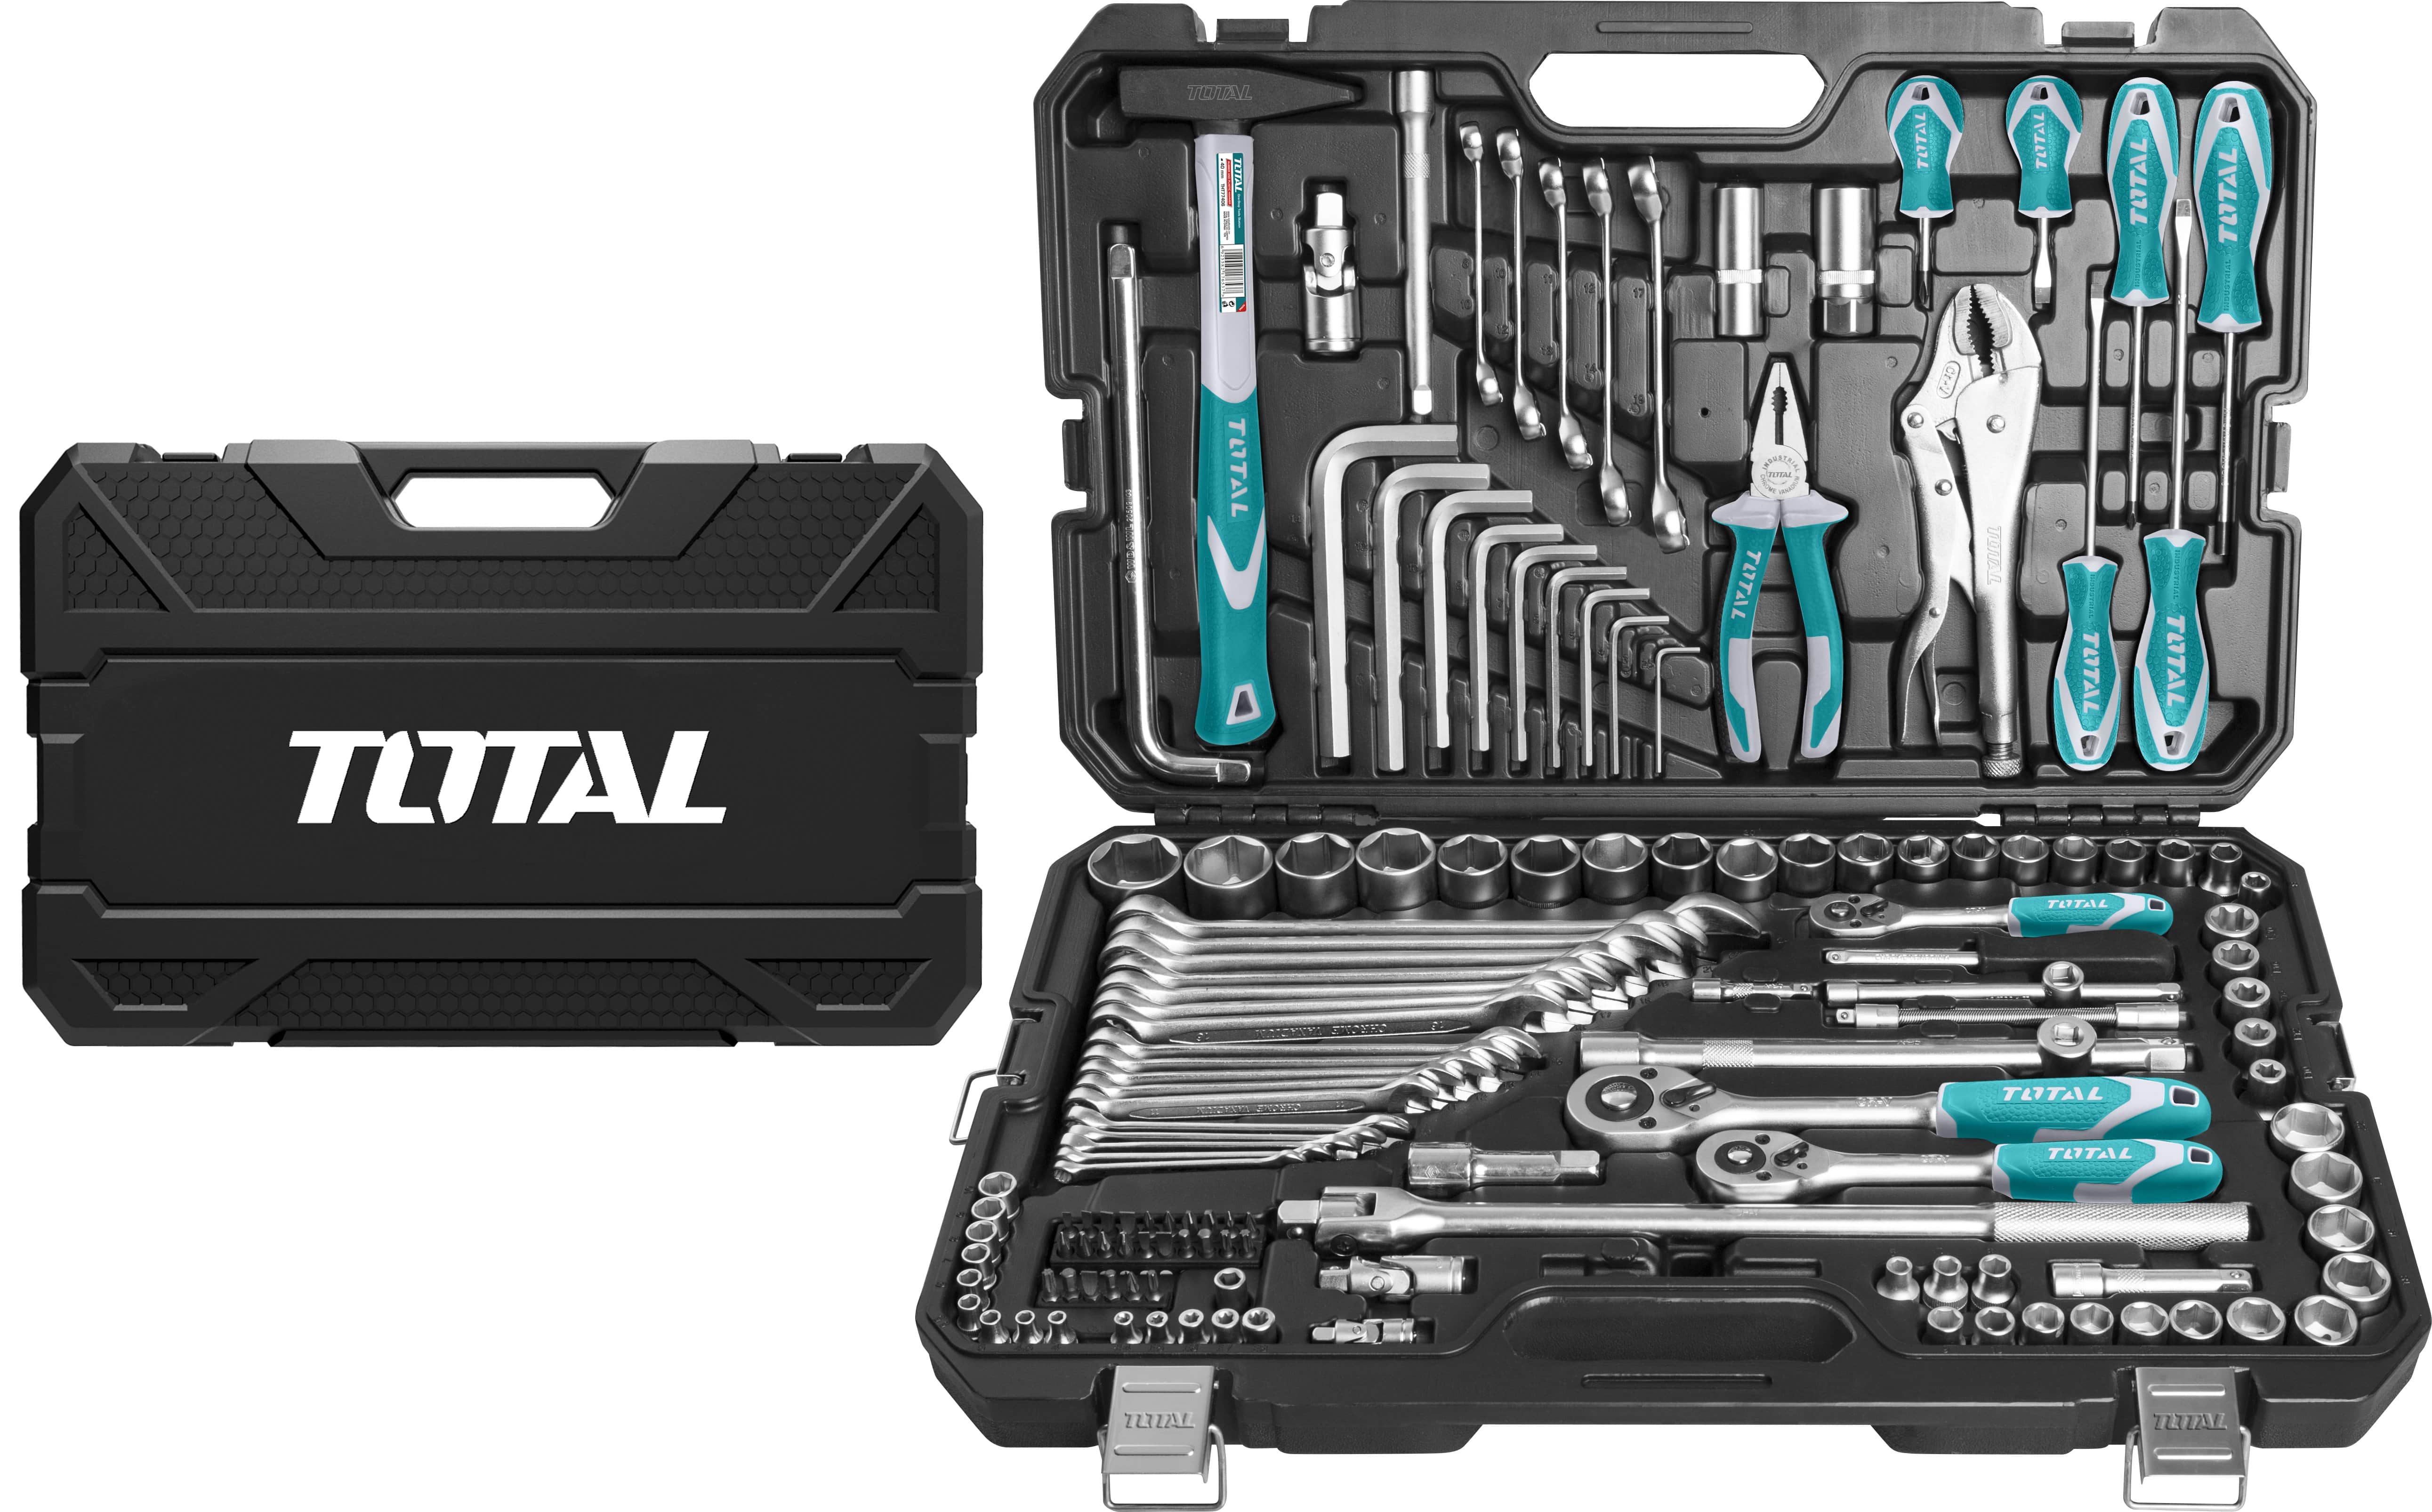 Total 142 Pieces Combination Tool Set - THKTHP21426 | Supply Master | Accra, Ghana Tools Building Steel Engineering Hardware tool